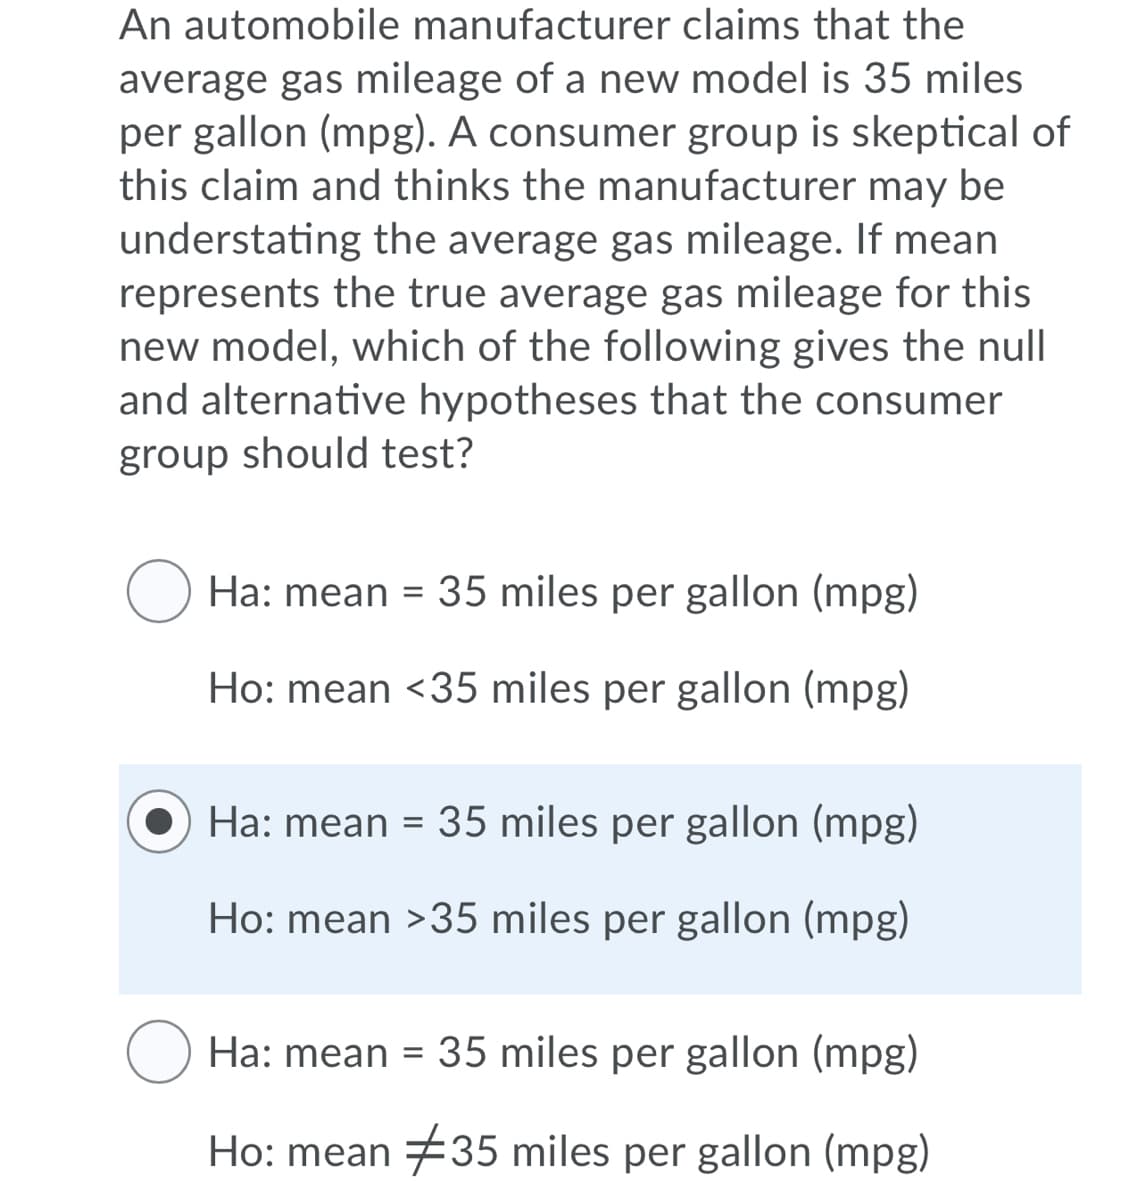 An automobile manufacturer claims that the
average gas mileage of a new model is 35 miles
per gallon (mpg). A consumer group is skeptical of
this claim and thinks the manufacturer may be
understating the average gas mileage. If mean
represents the true average gas mileage for this
new model, which of the following gives the null
and alternative hypotheses that the consumer
group should test?
Ha: mean = 35 miles per gallon (mpg)
Ho: mean <35 miles per gallon (mpg)
O Ha: mean = 35 miles per gallon (mpg)
Ho: mean >35 miles per gallon (mpg)
O Ha: mean = 35 miles per gallon (mpg)
Ho: mean #35 miles per gallon (mpg)
